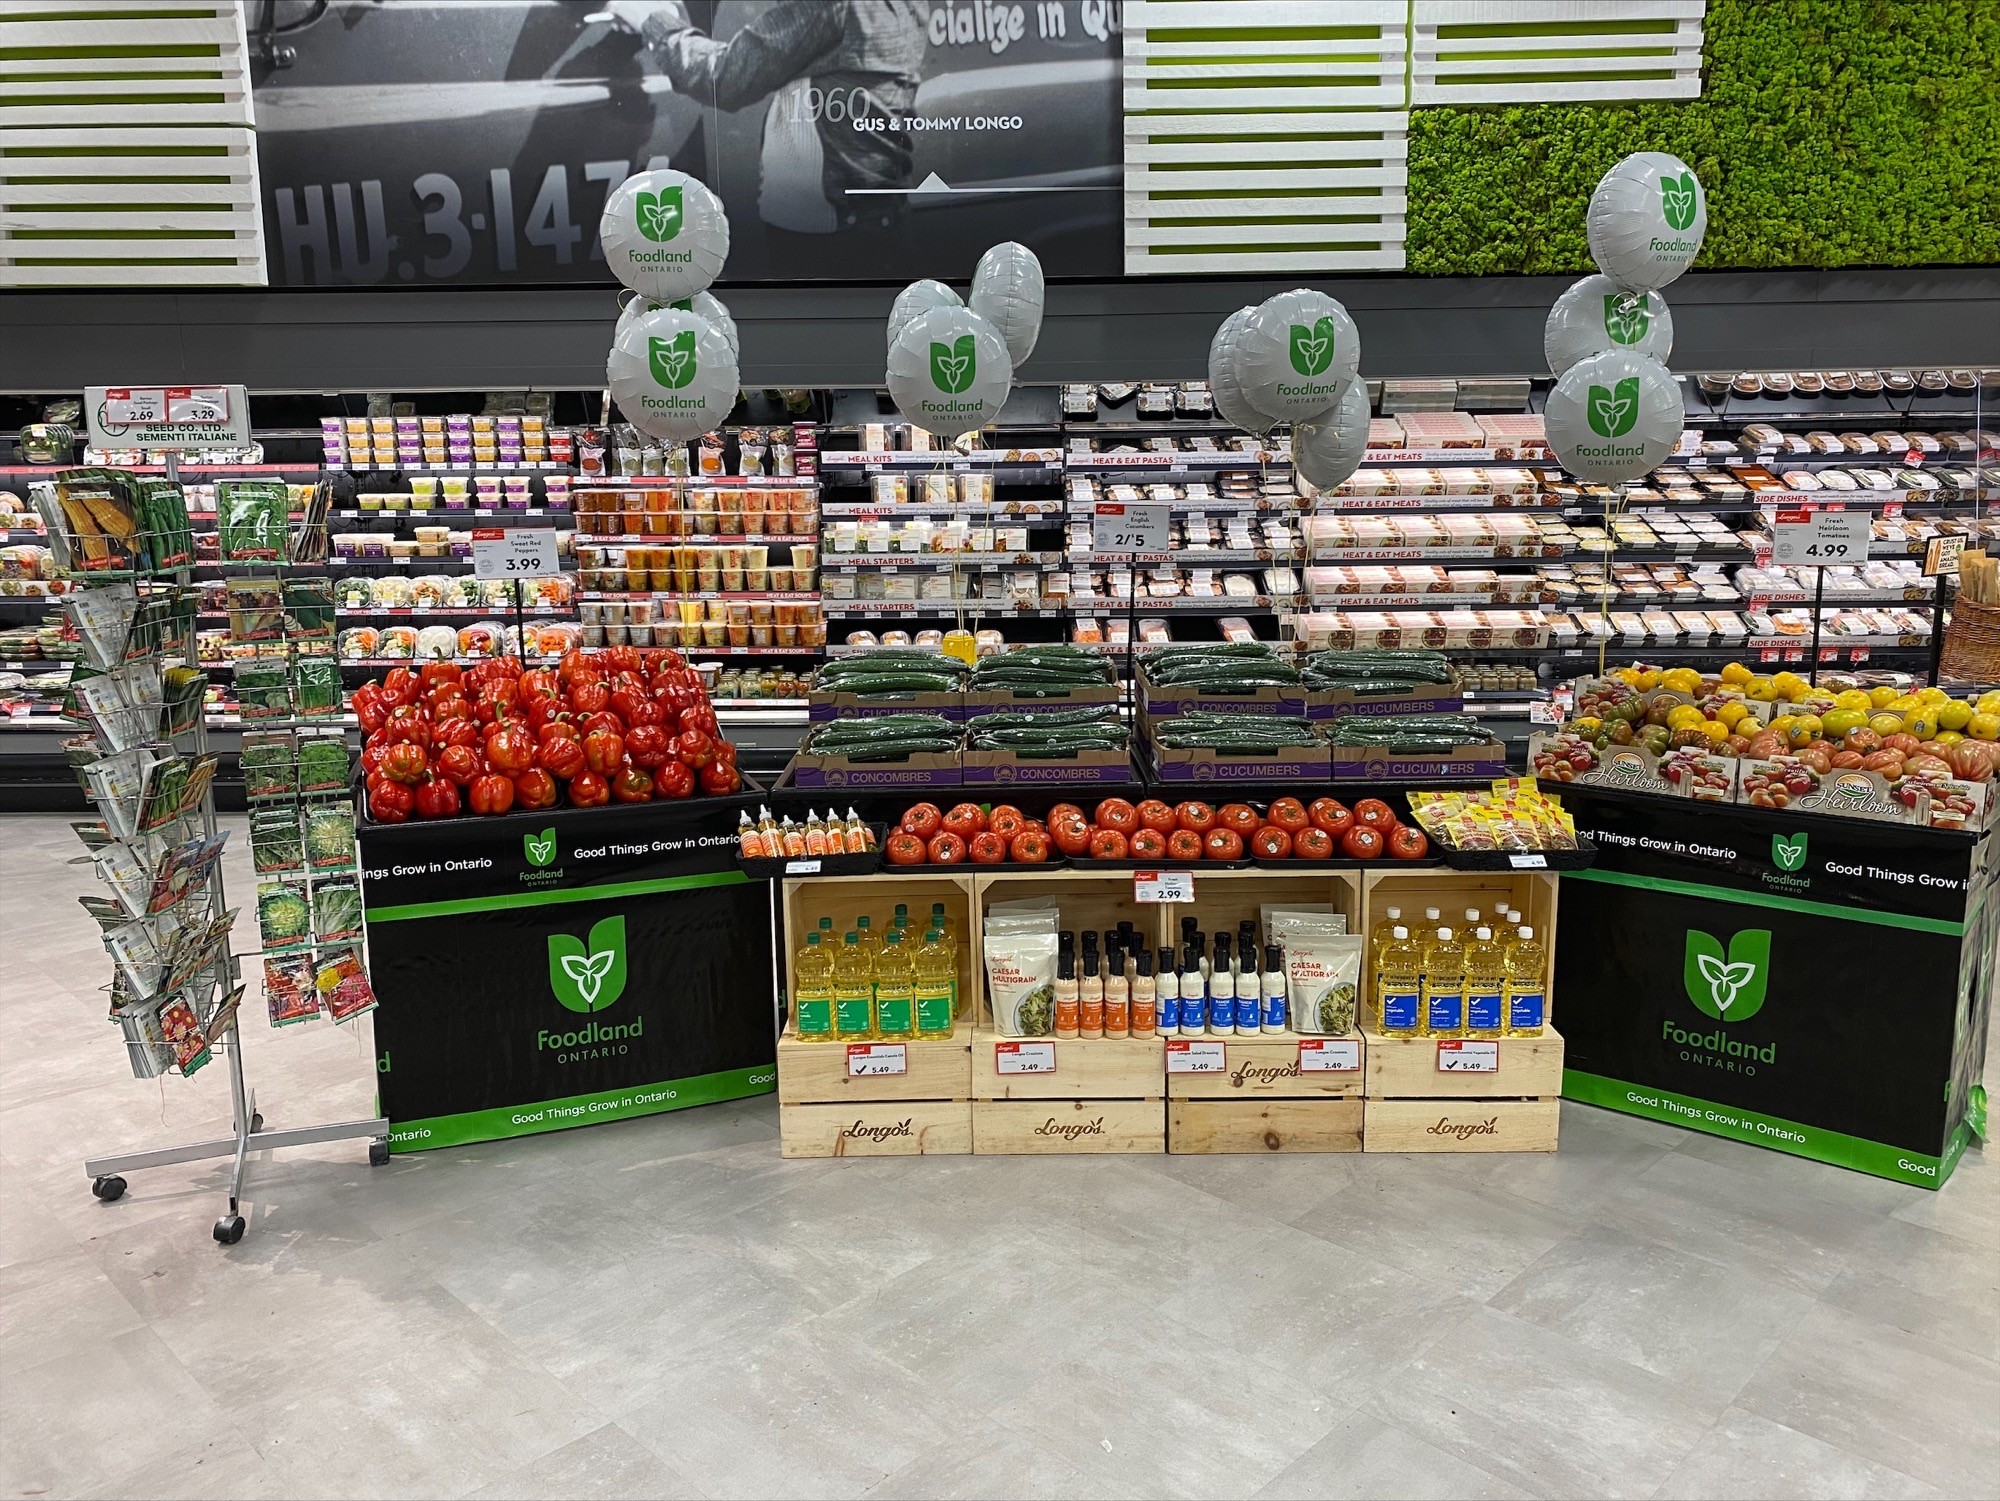  The cucumber, bell pepper and tomato produce merchandising display at Longo's Walkers Line features a seed packet stand next to the display. And did you notice the cross-merchandising of oils and dressings?